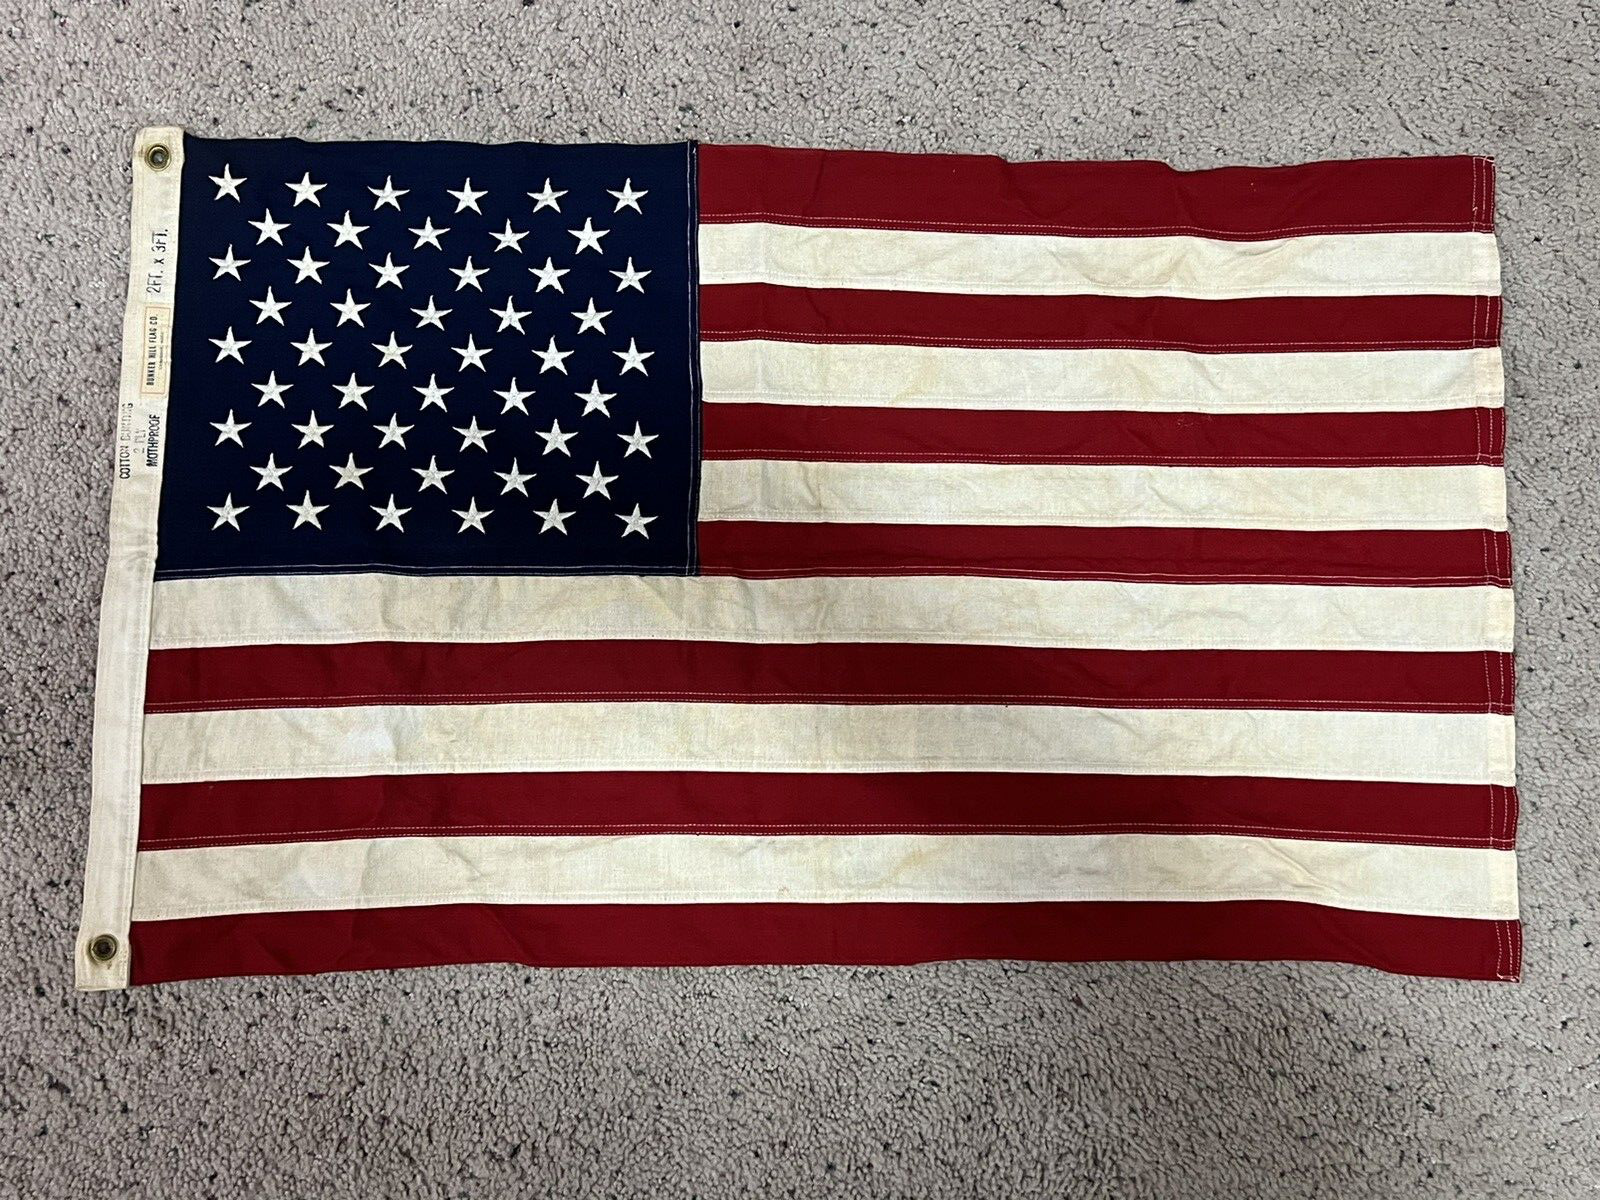 Vintage Bunker Hill Flag Co. 2\' x 3\' Cotton Stitched 50 Star American USA Flag